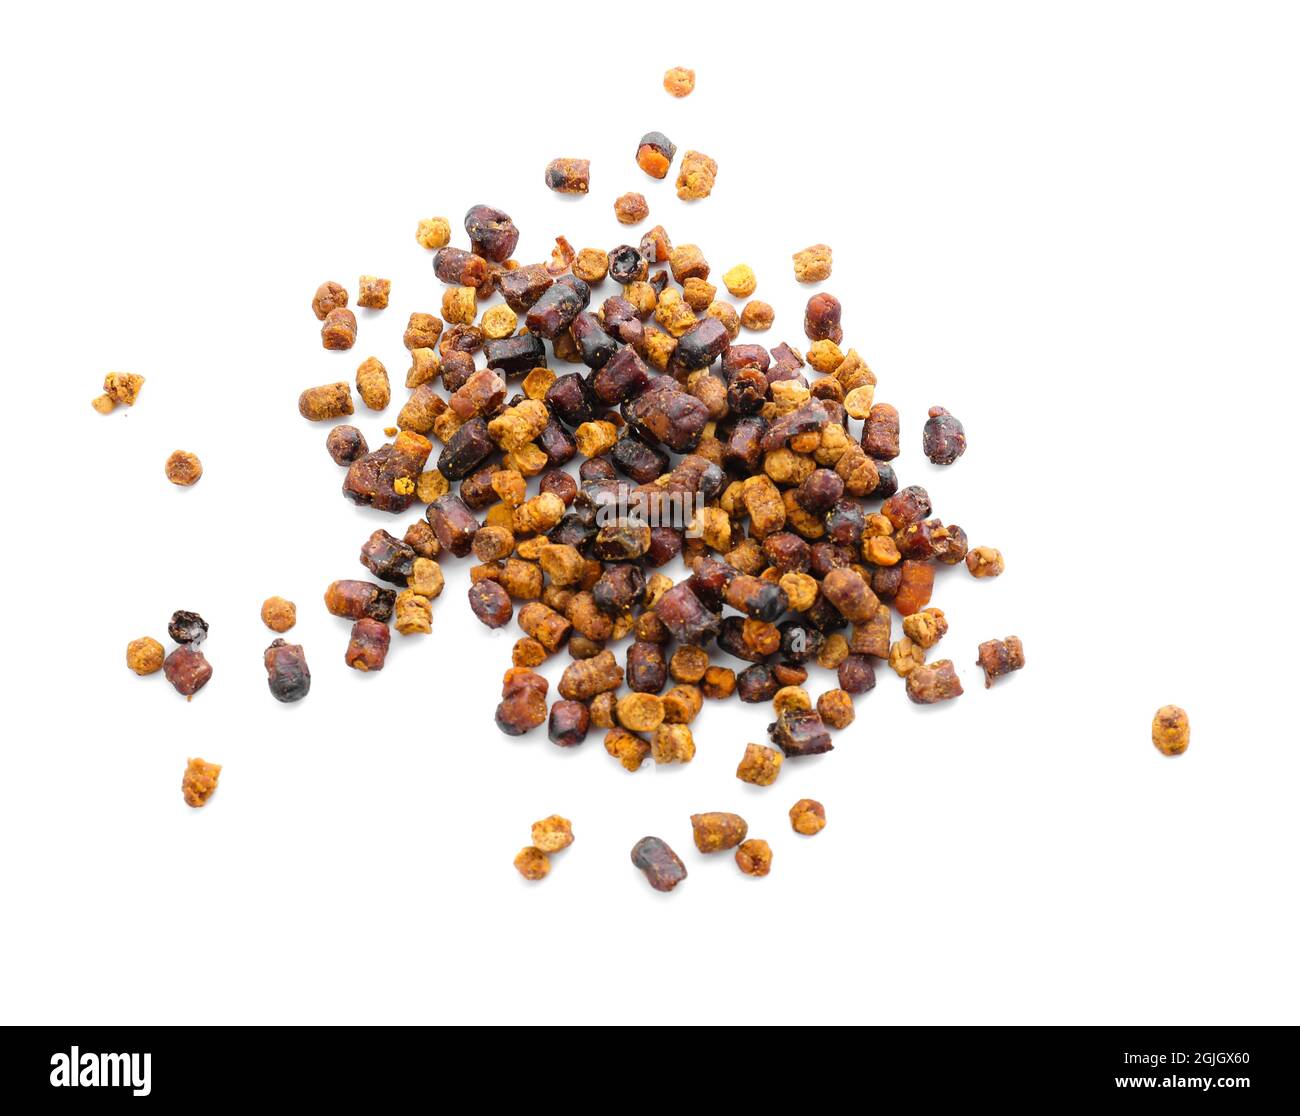 Heap of beebread on white background Stock Photo